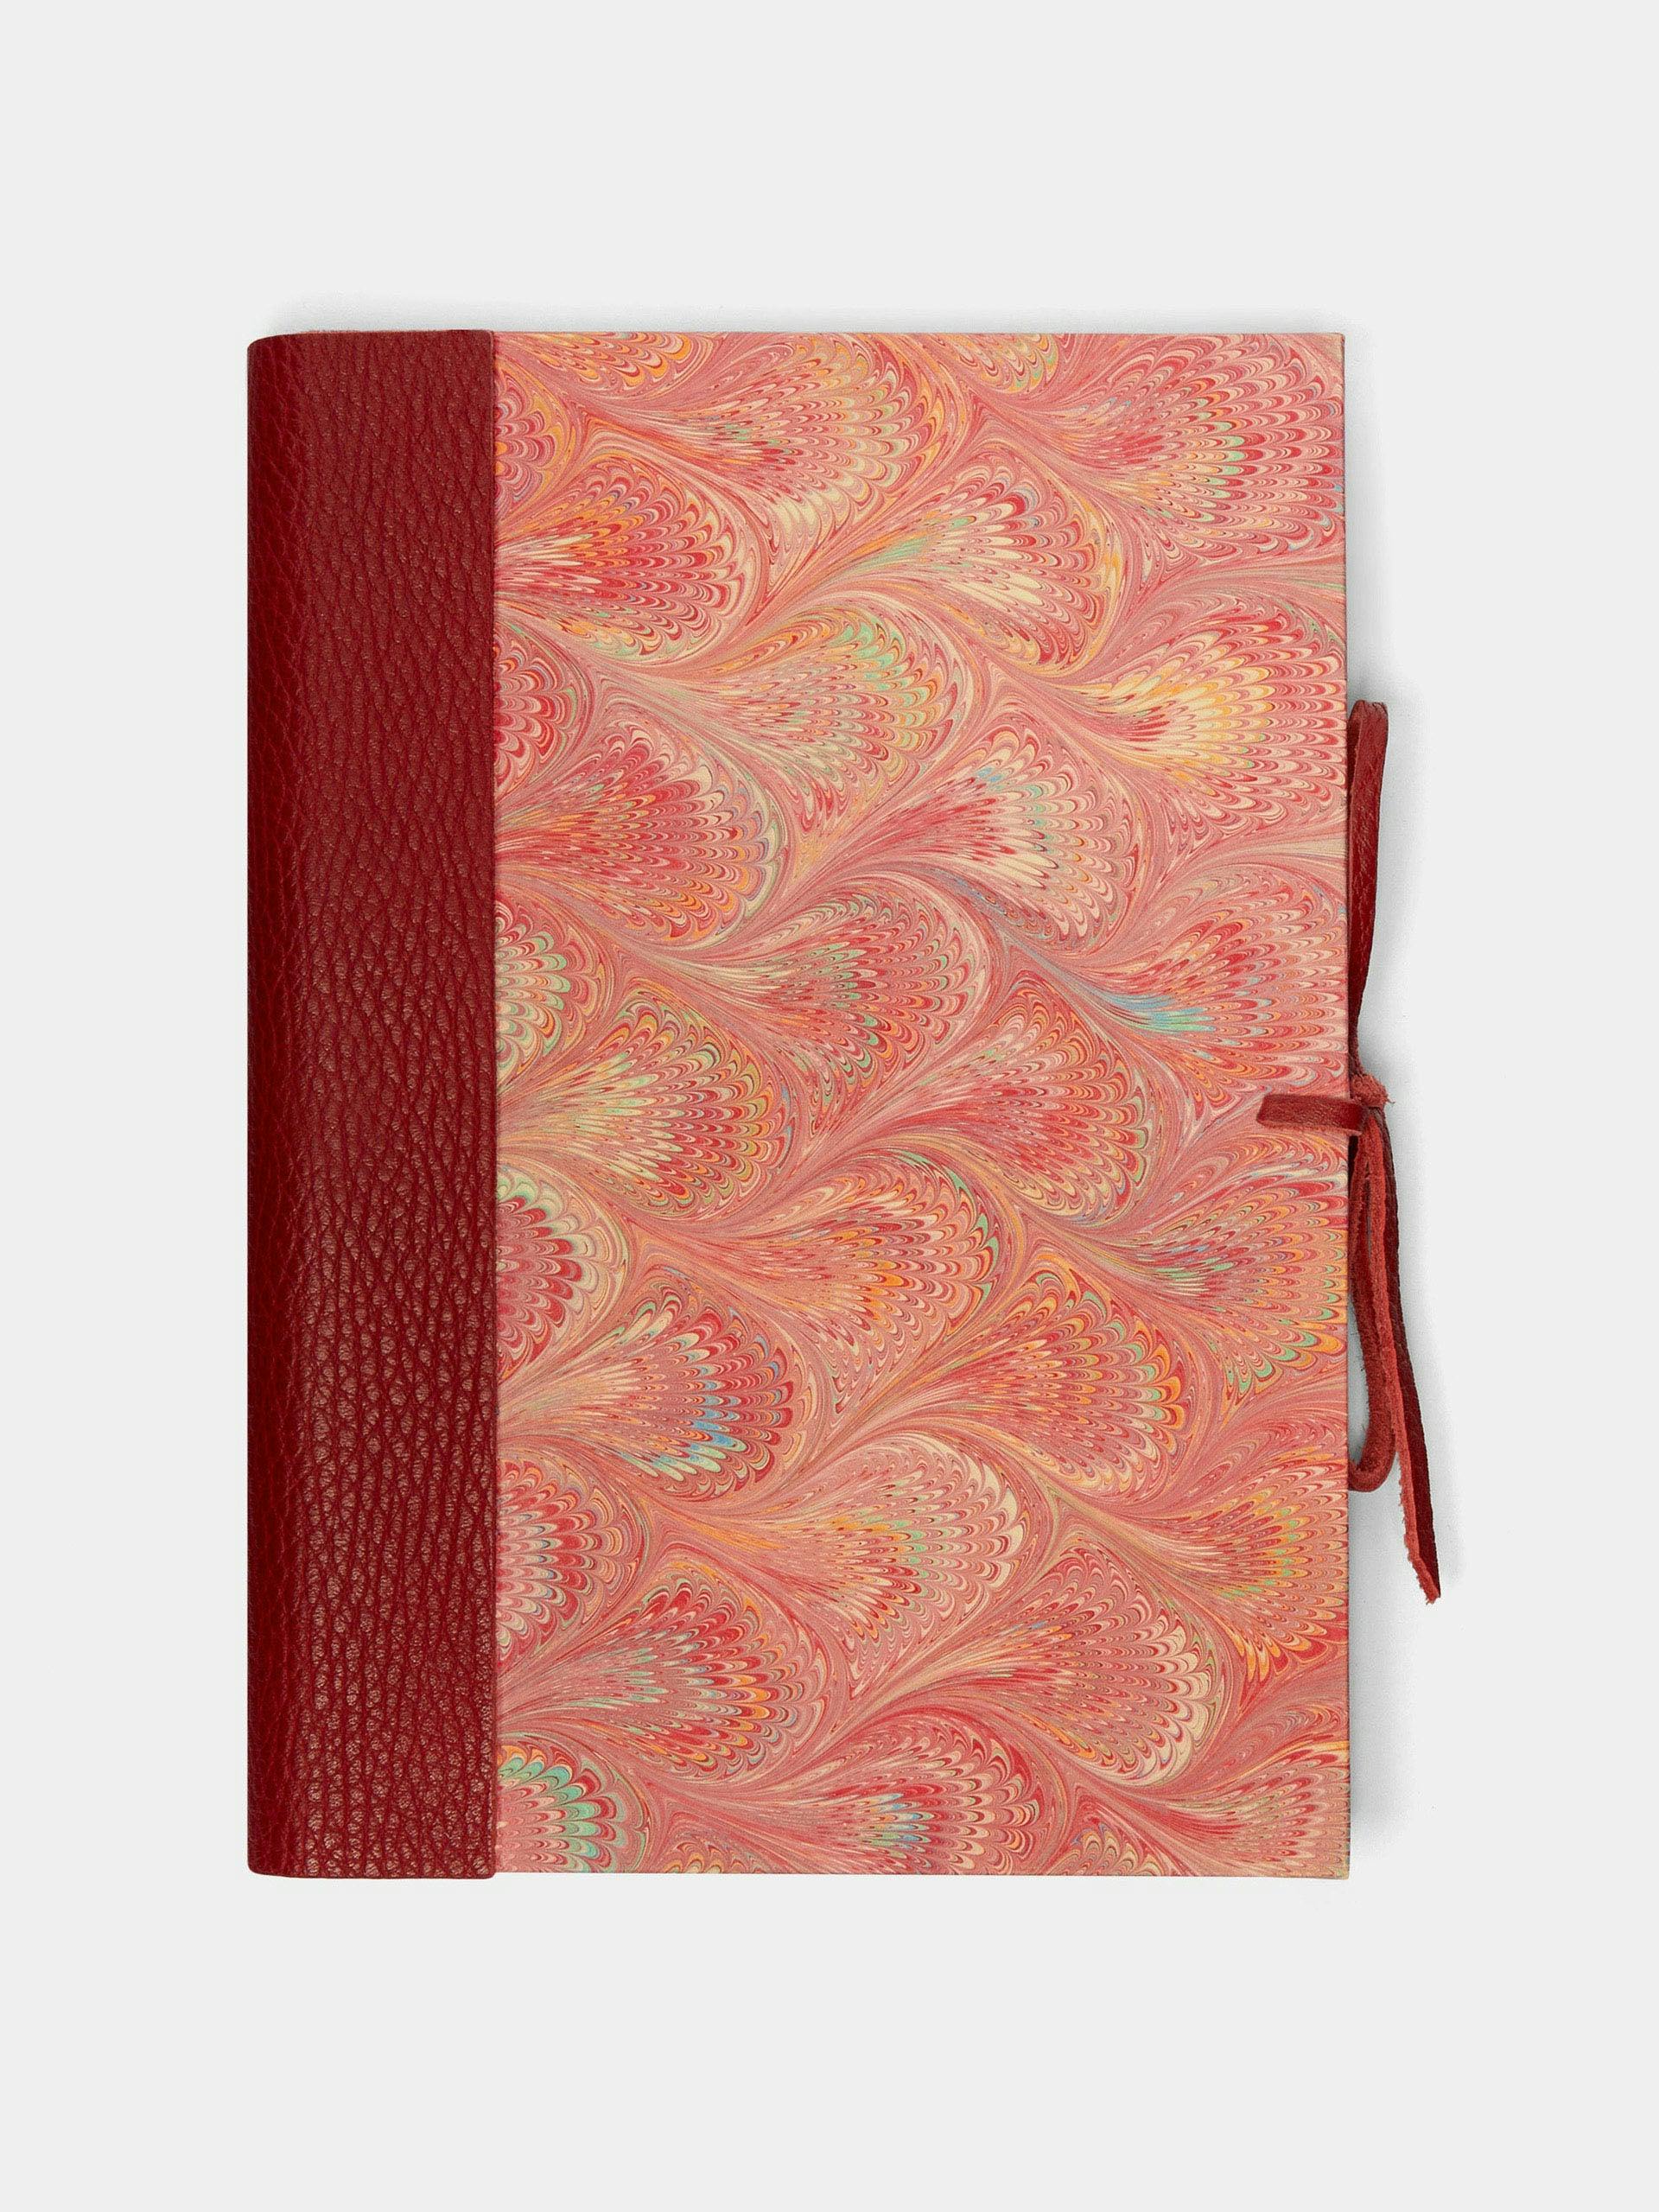 Hand-marbled leather bound notebook